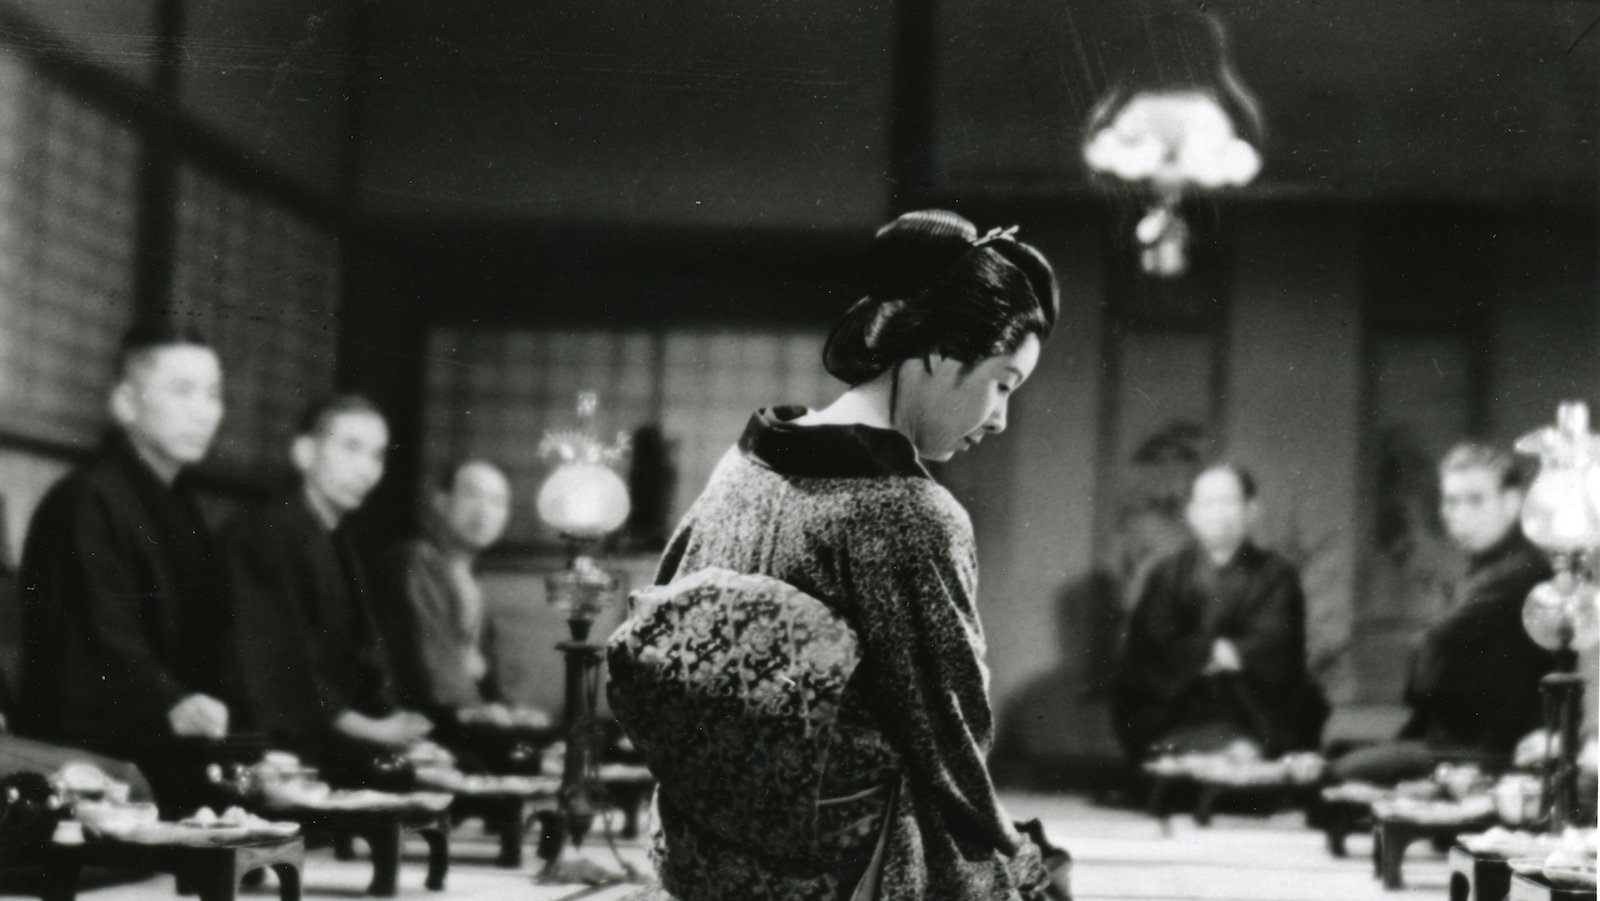 A black and white photo of a woman in traditional Japanese clothes, seen from the back, leaning over a table setting on the floor, which human figures out of focus in the background.